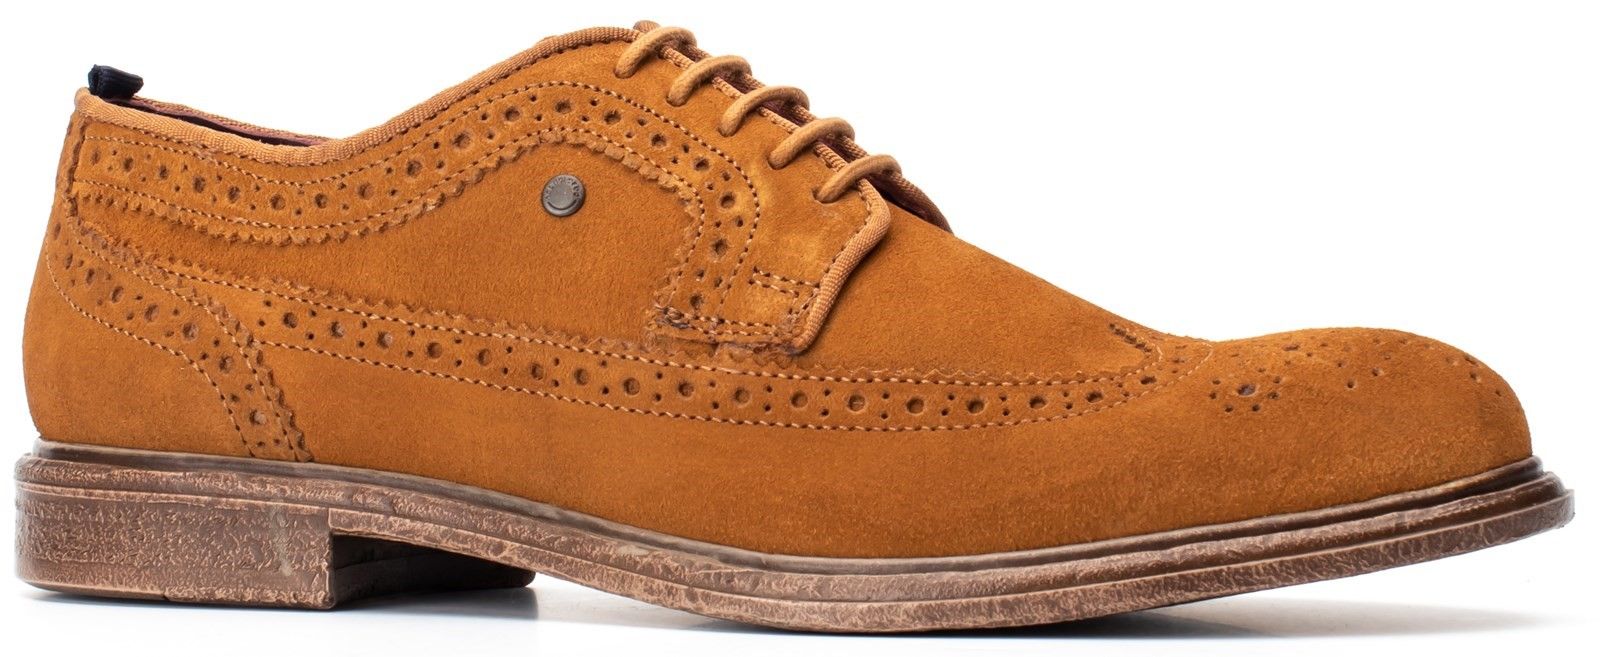 Onyx Suede Lace Up Brogue